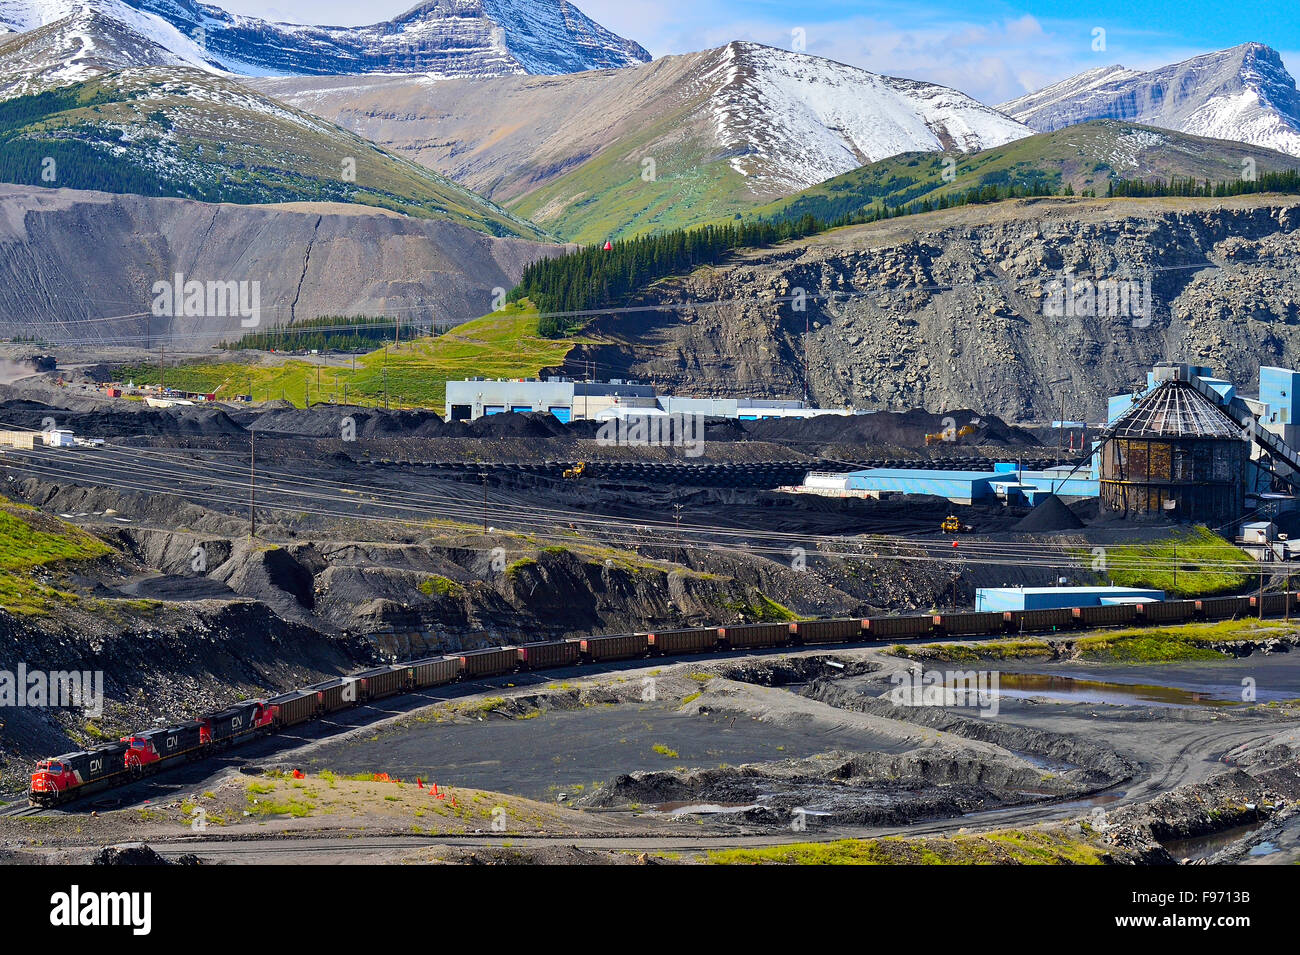 A horizontal landscape image of the Teck coal processing plant in the foothills of the rocky mountains near Cadomine Alberta, Stock Photo